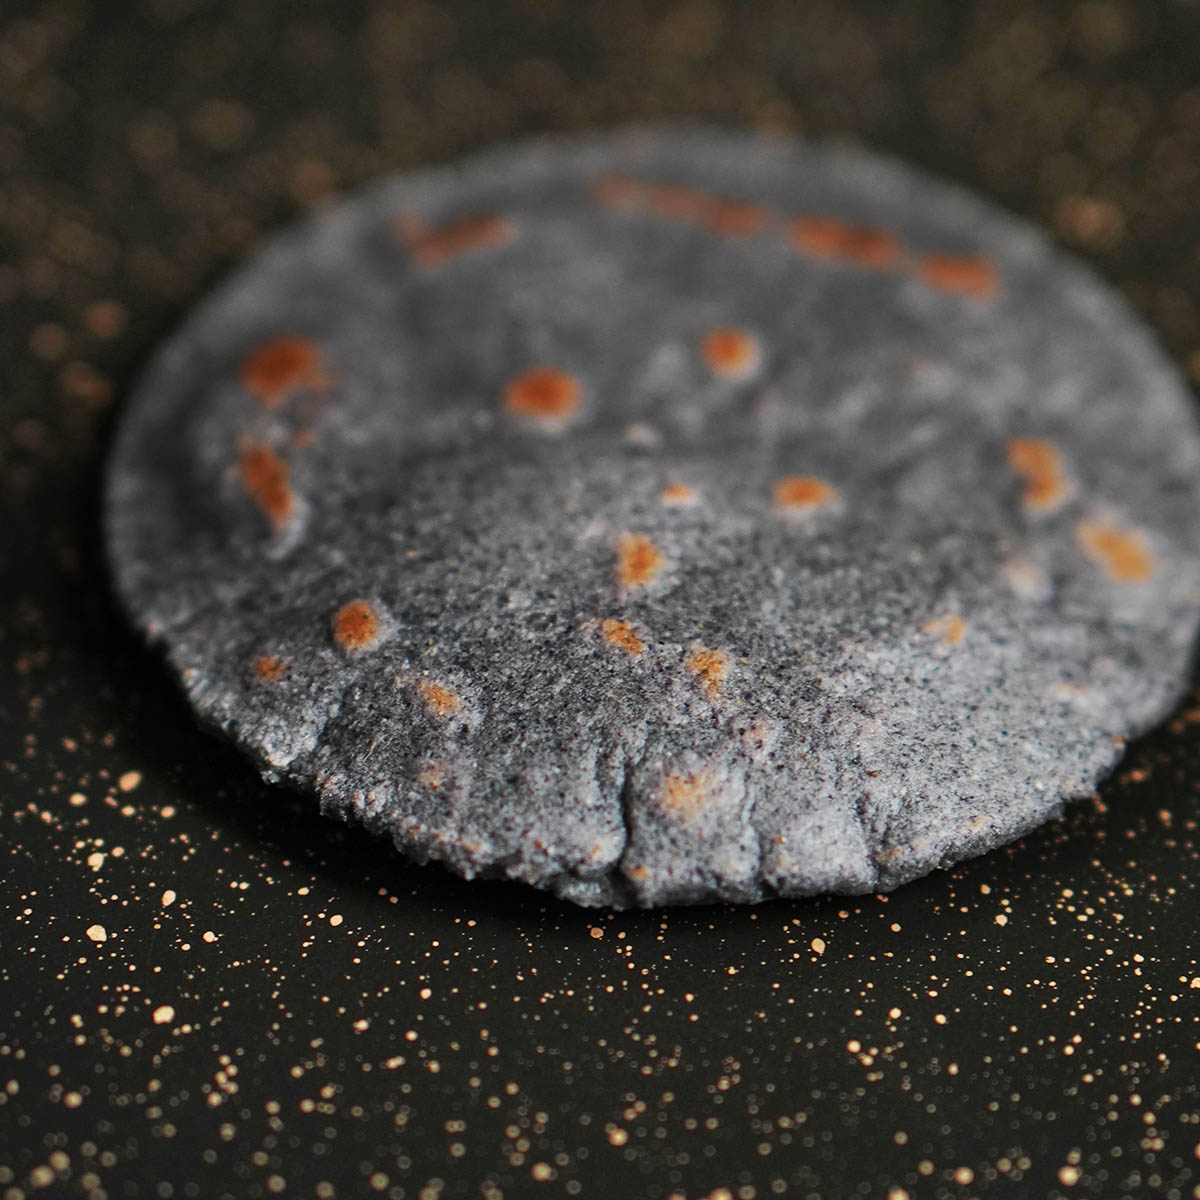 A blue corn tortilla cooked on a black skillet with brown marks.